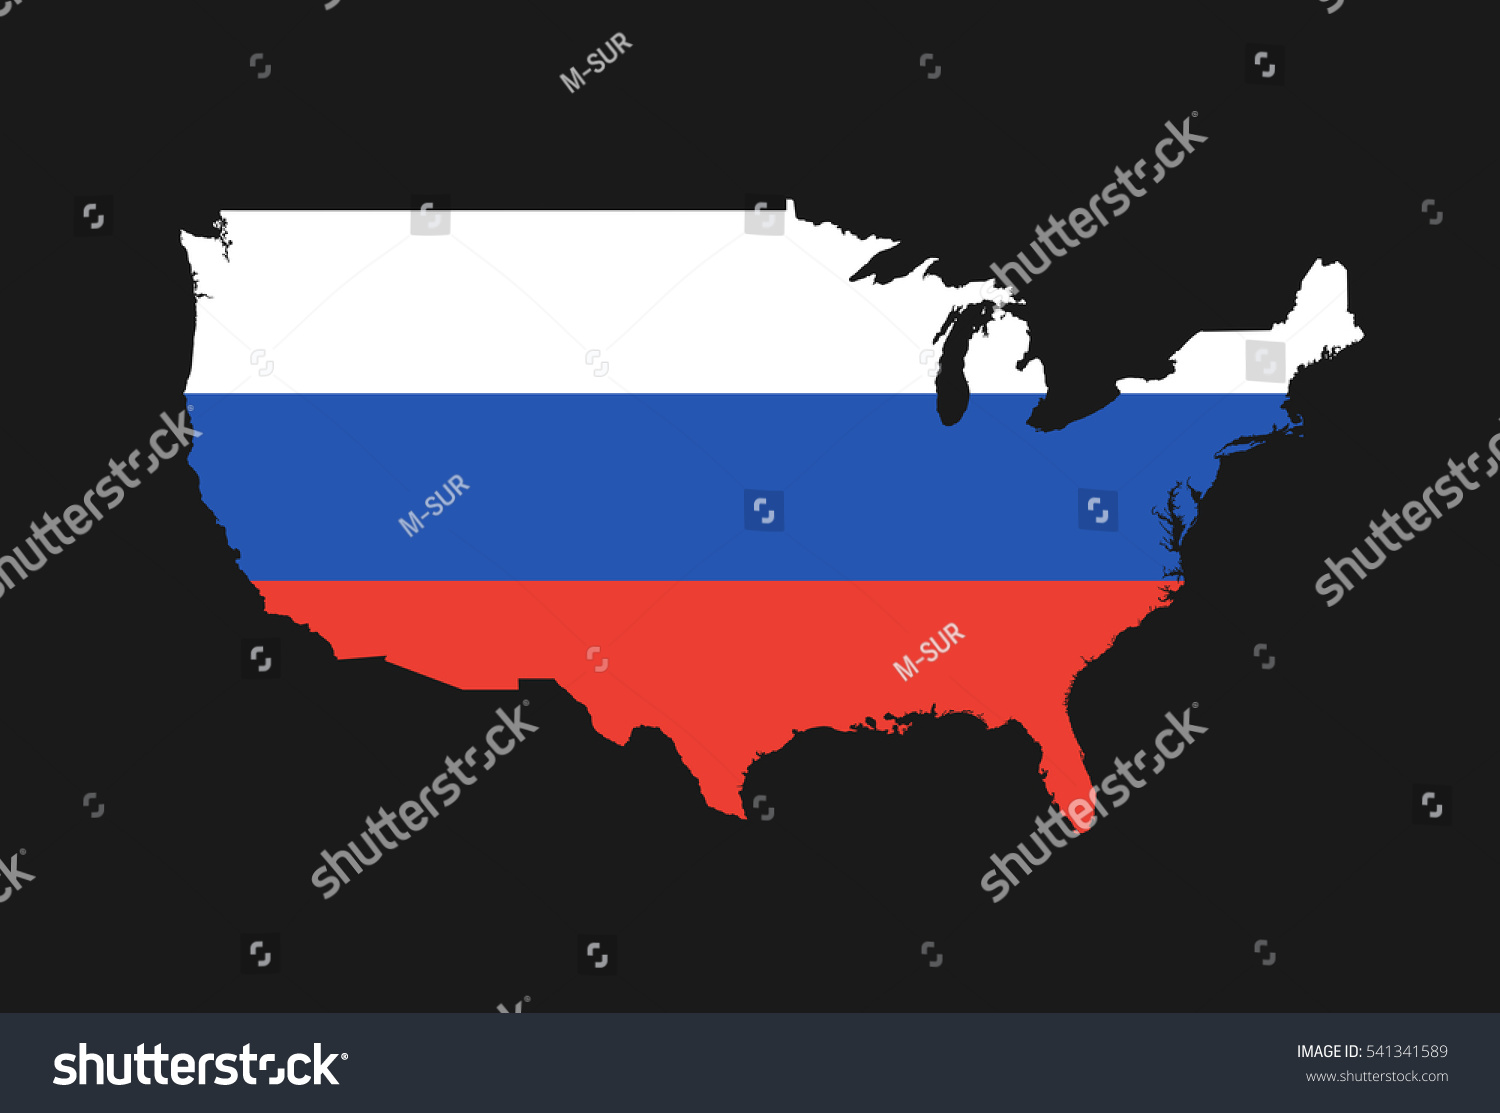 Map Usa Colors Russia Metaphor Russian Stock Vector Royalty Free